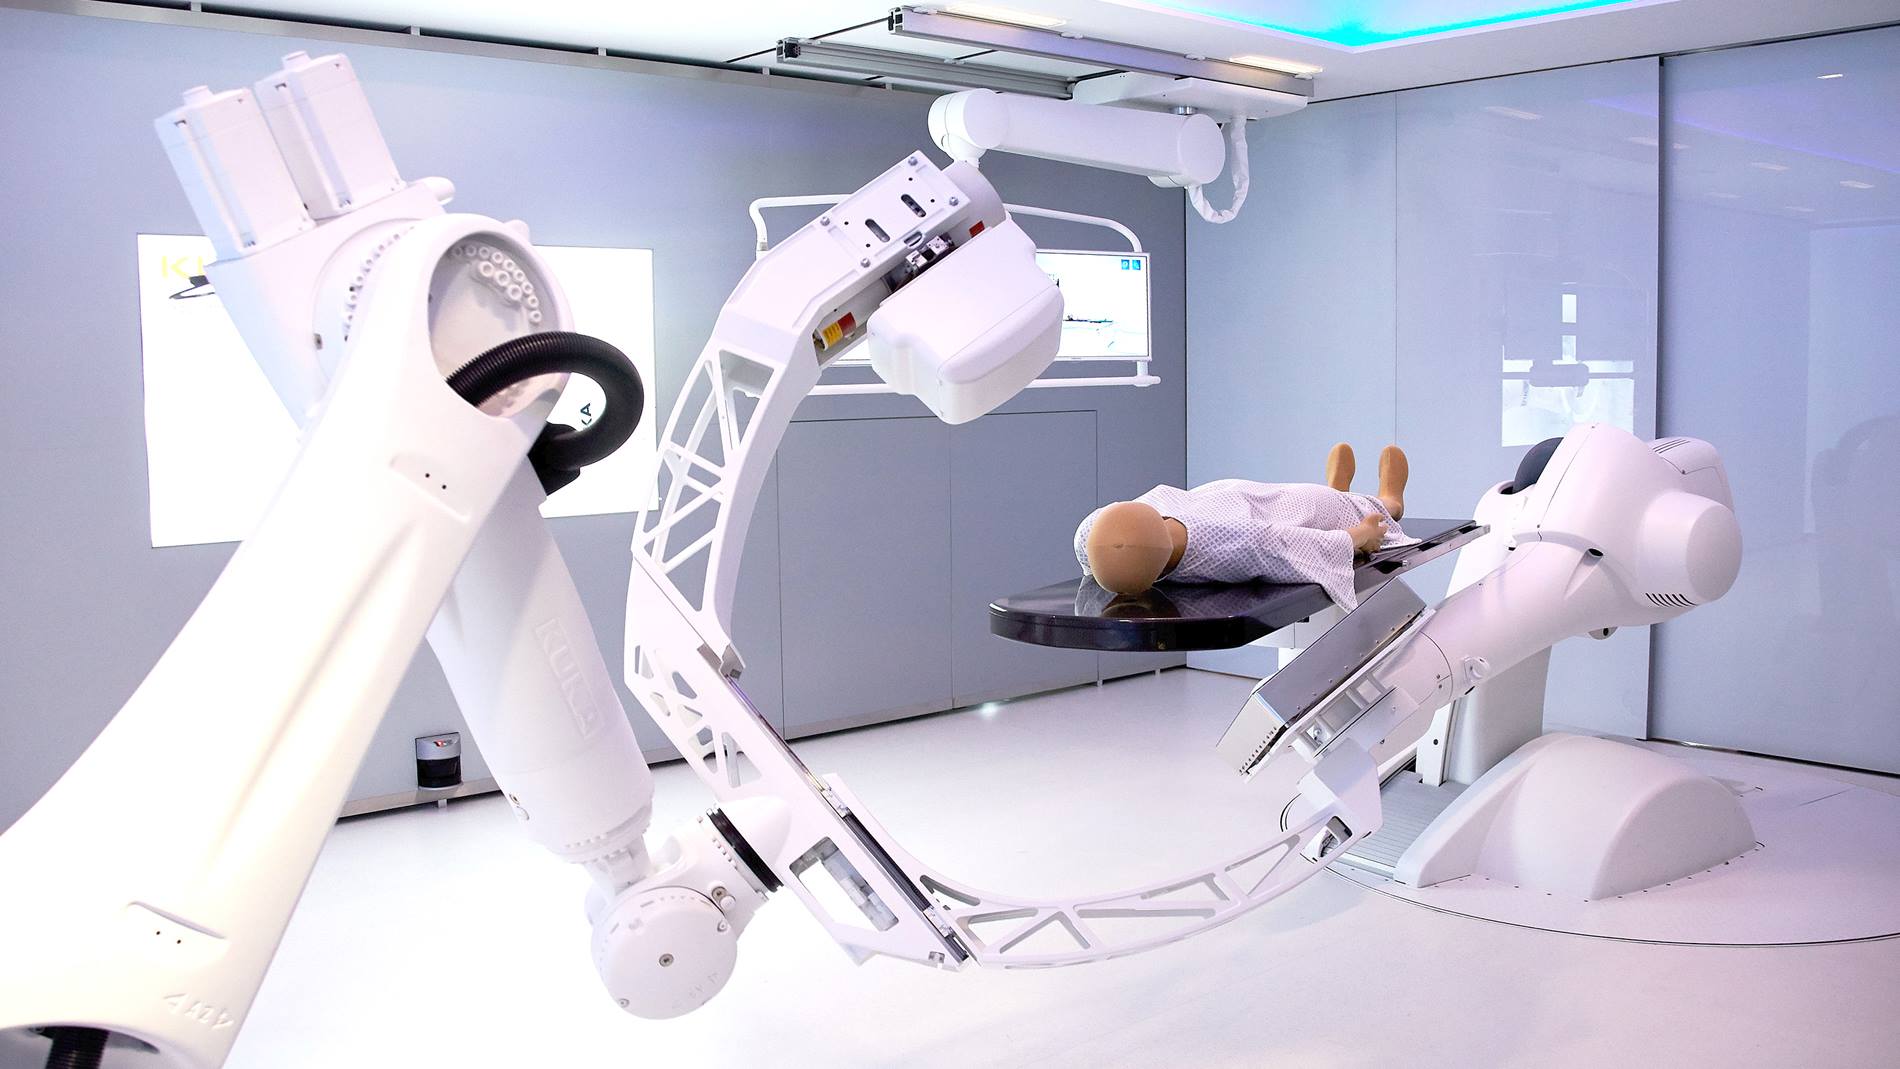 Impact of Robotics in the Medical Industry